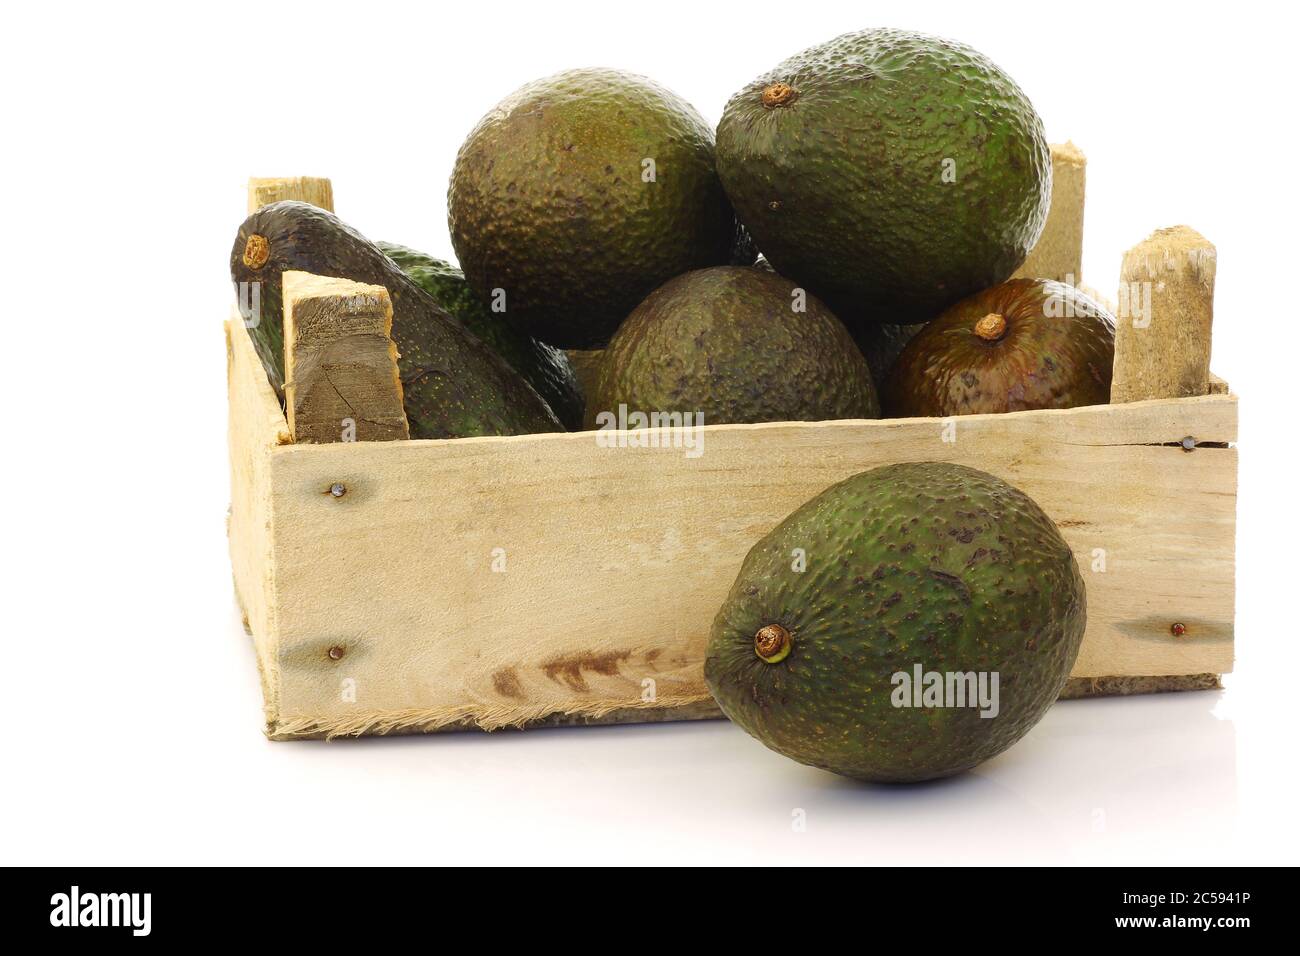 fresh and ripe avocado's in a wooden crate on a white background Stock Photo